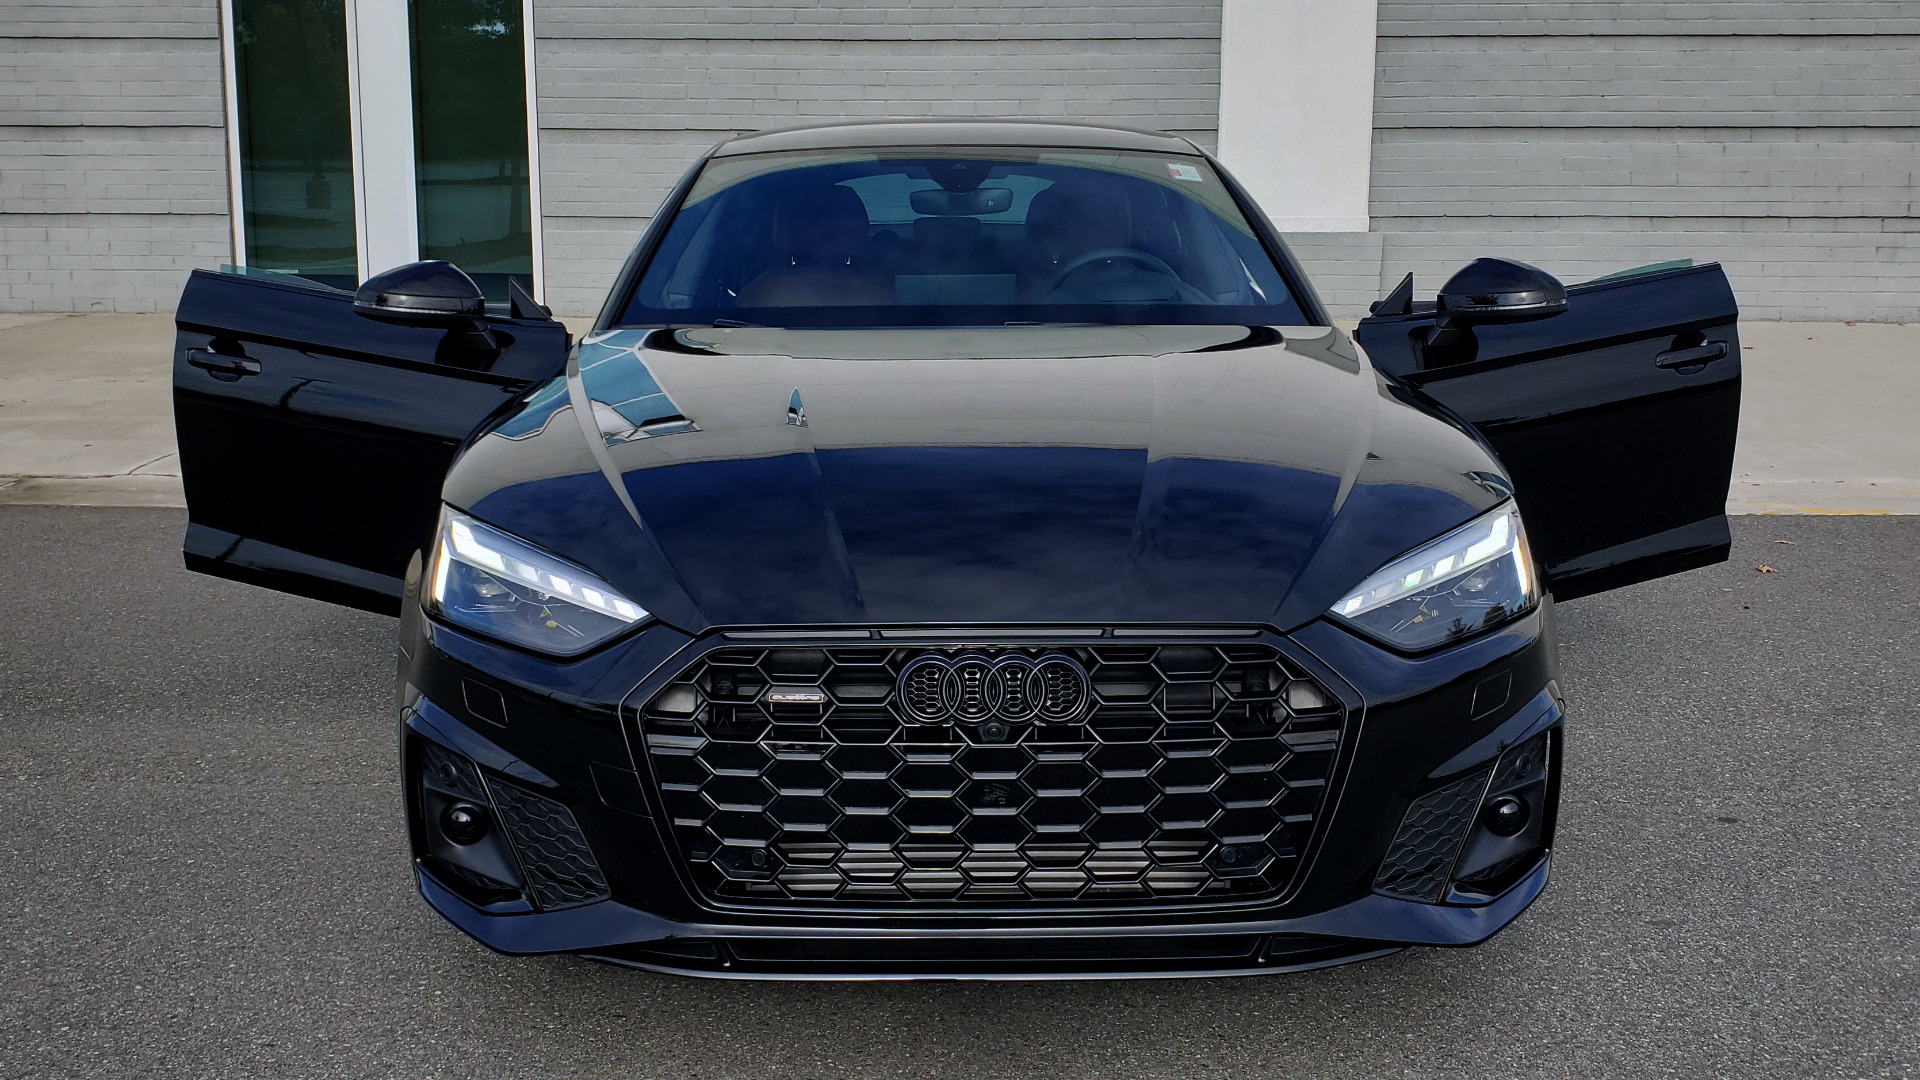 Used 2021 Audi A5 SPORTBACK S-LINE PRESTIGE / NAV / SUNROOF / BLACK OPTIC / VENT SEATS / REARVIEW for sale Sold at Formula Imports in Charlotte NC 28227 24